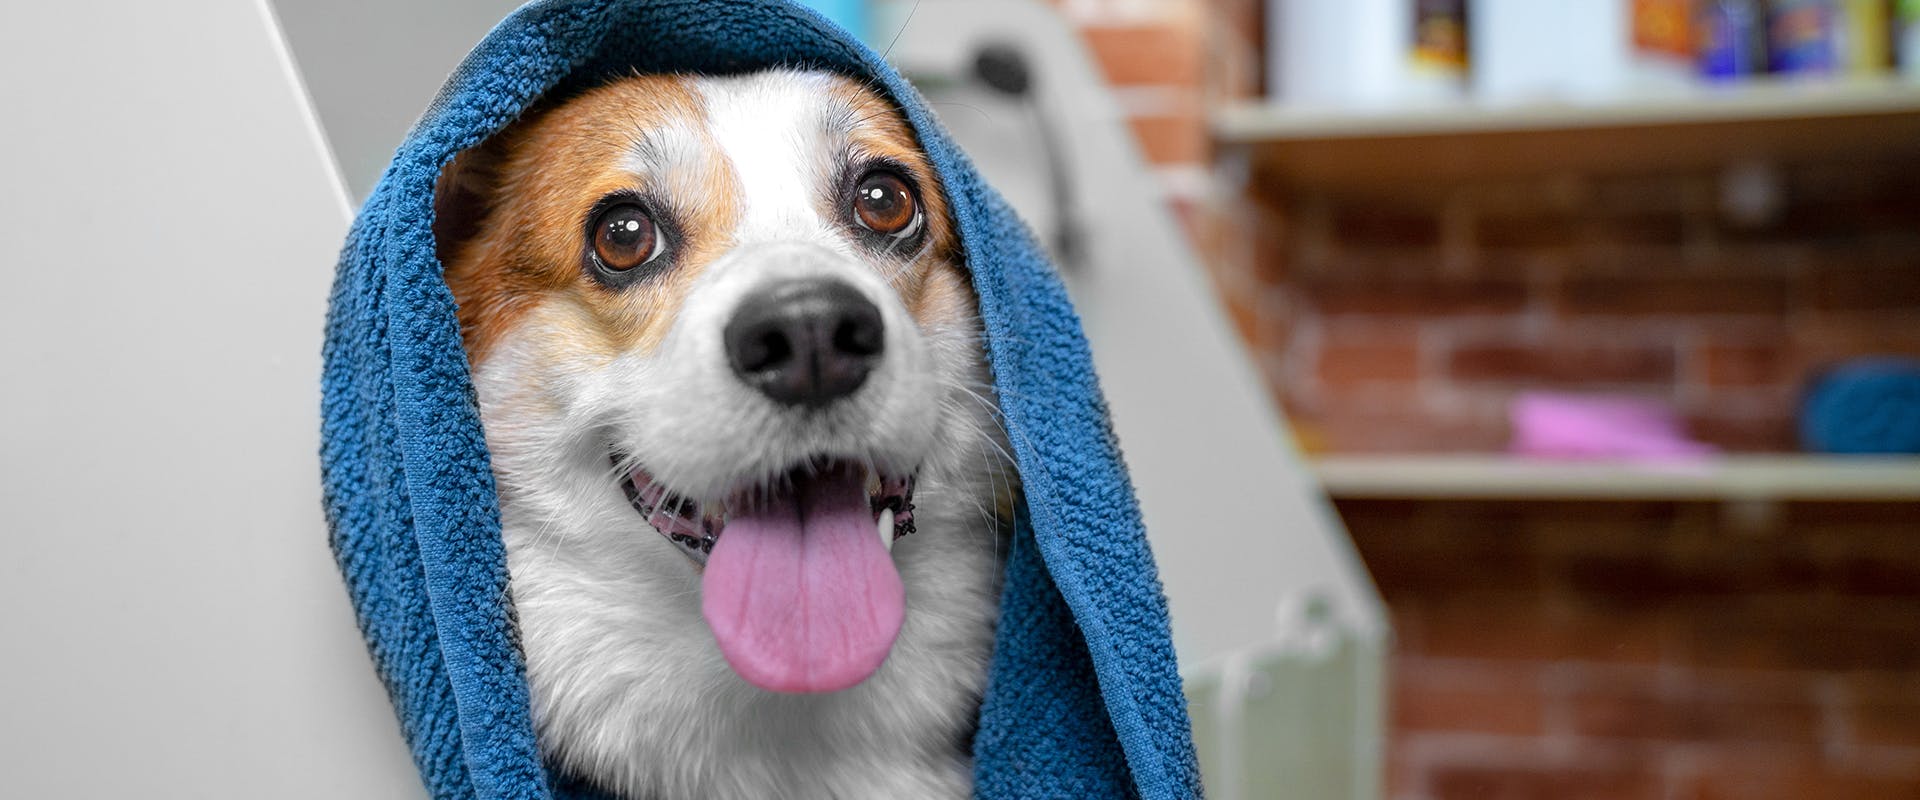 A dog at the groomers, wrapped up in a blue towel